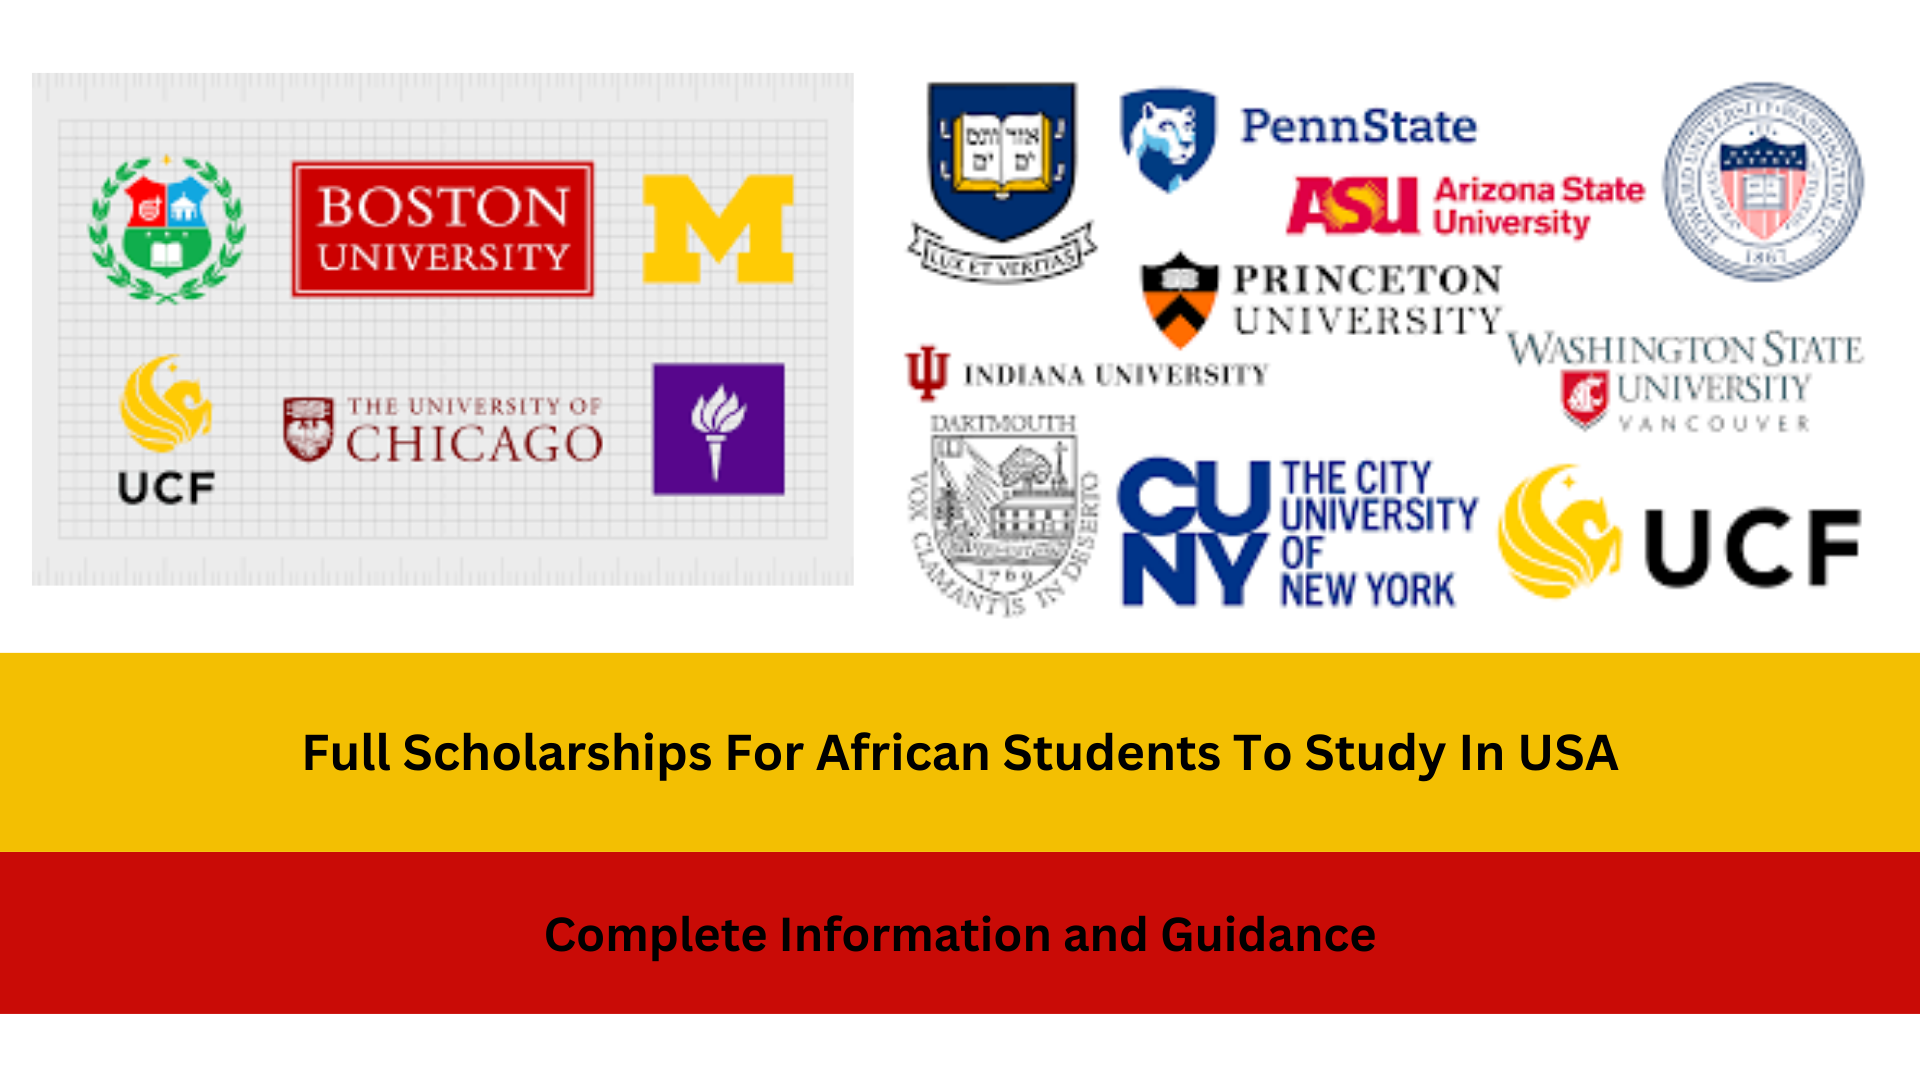 Full Scholarships For African Students To Study In USA